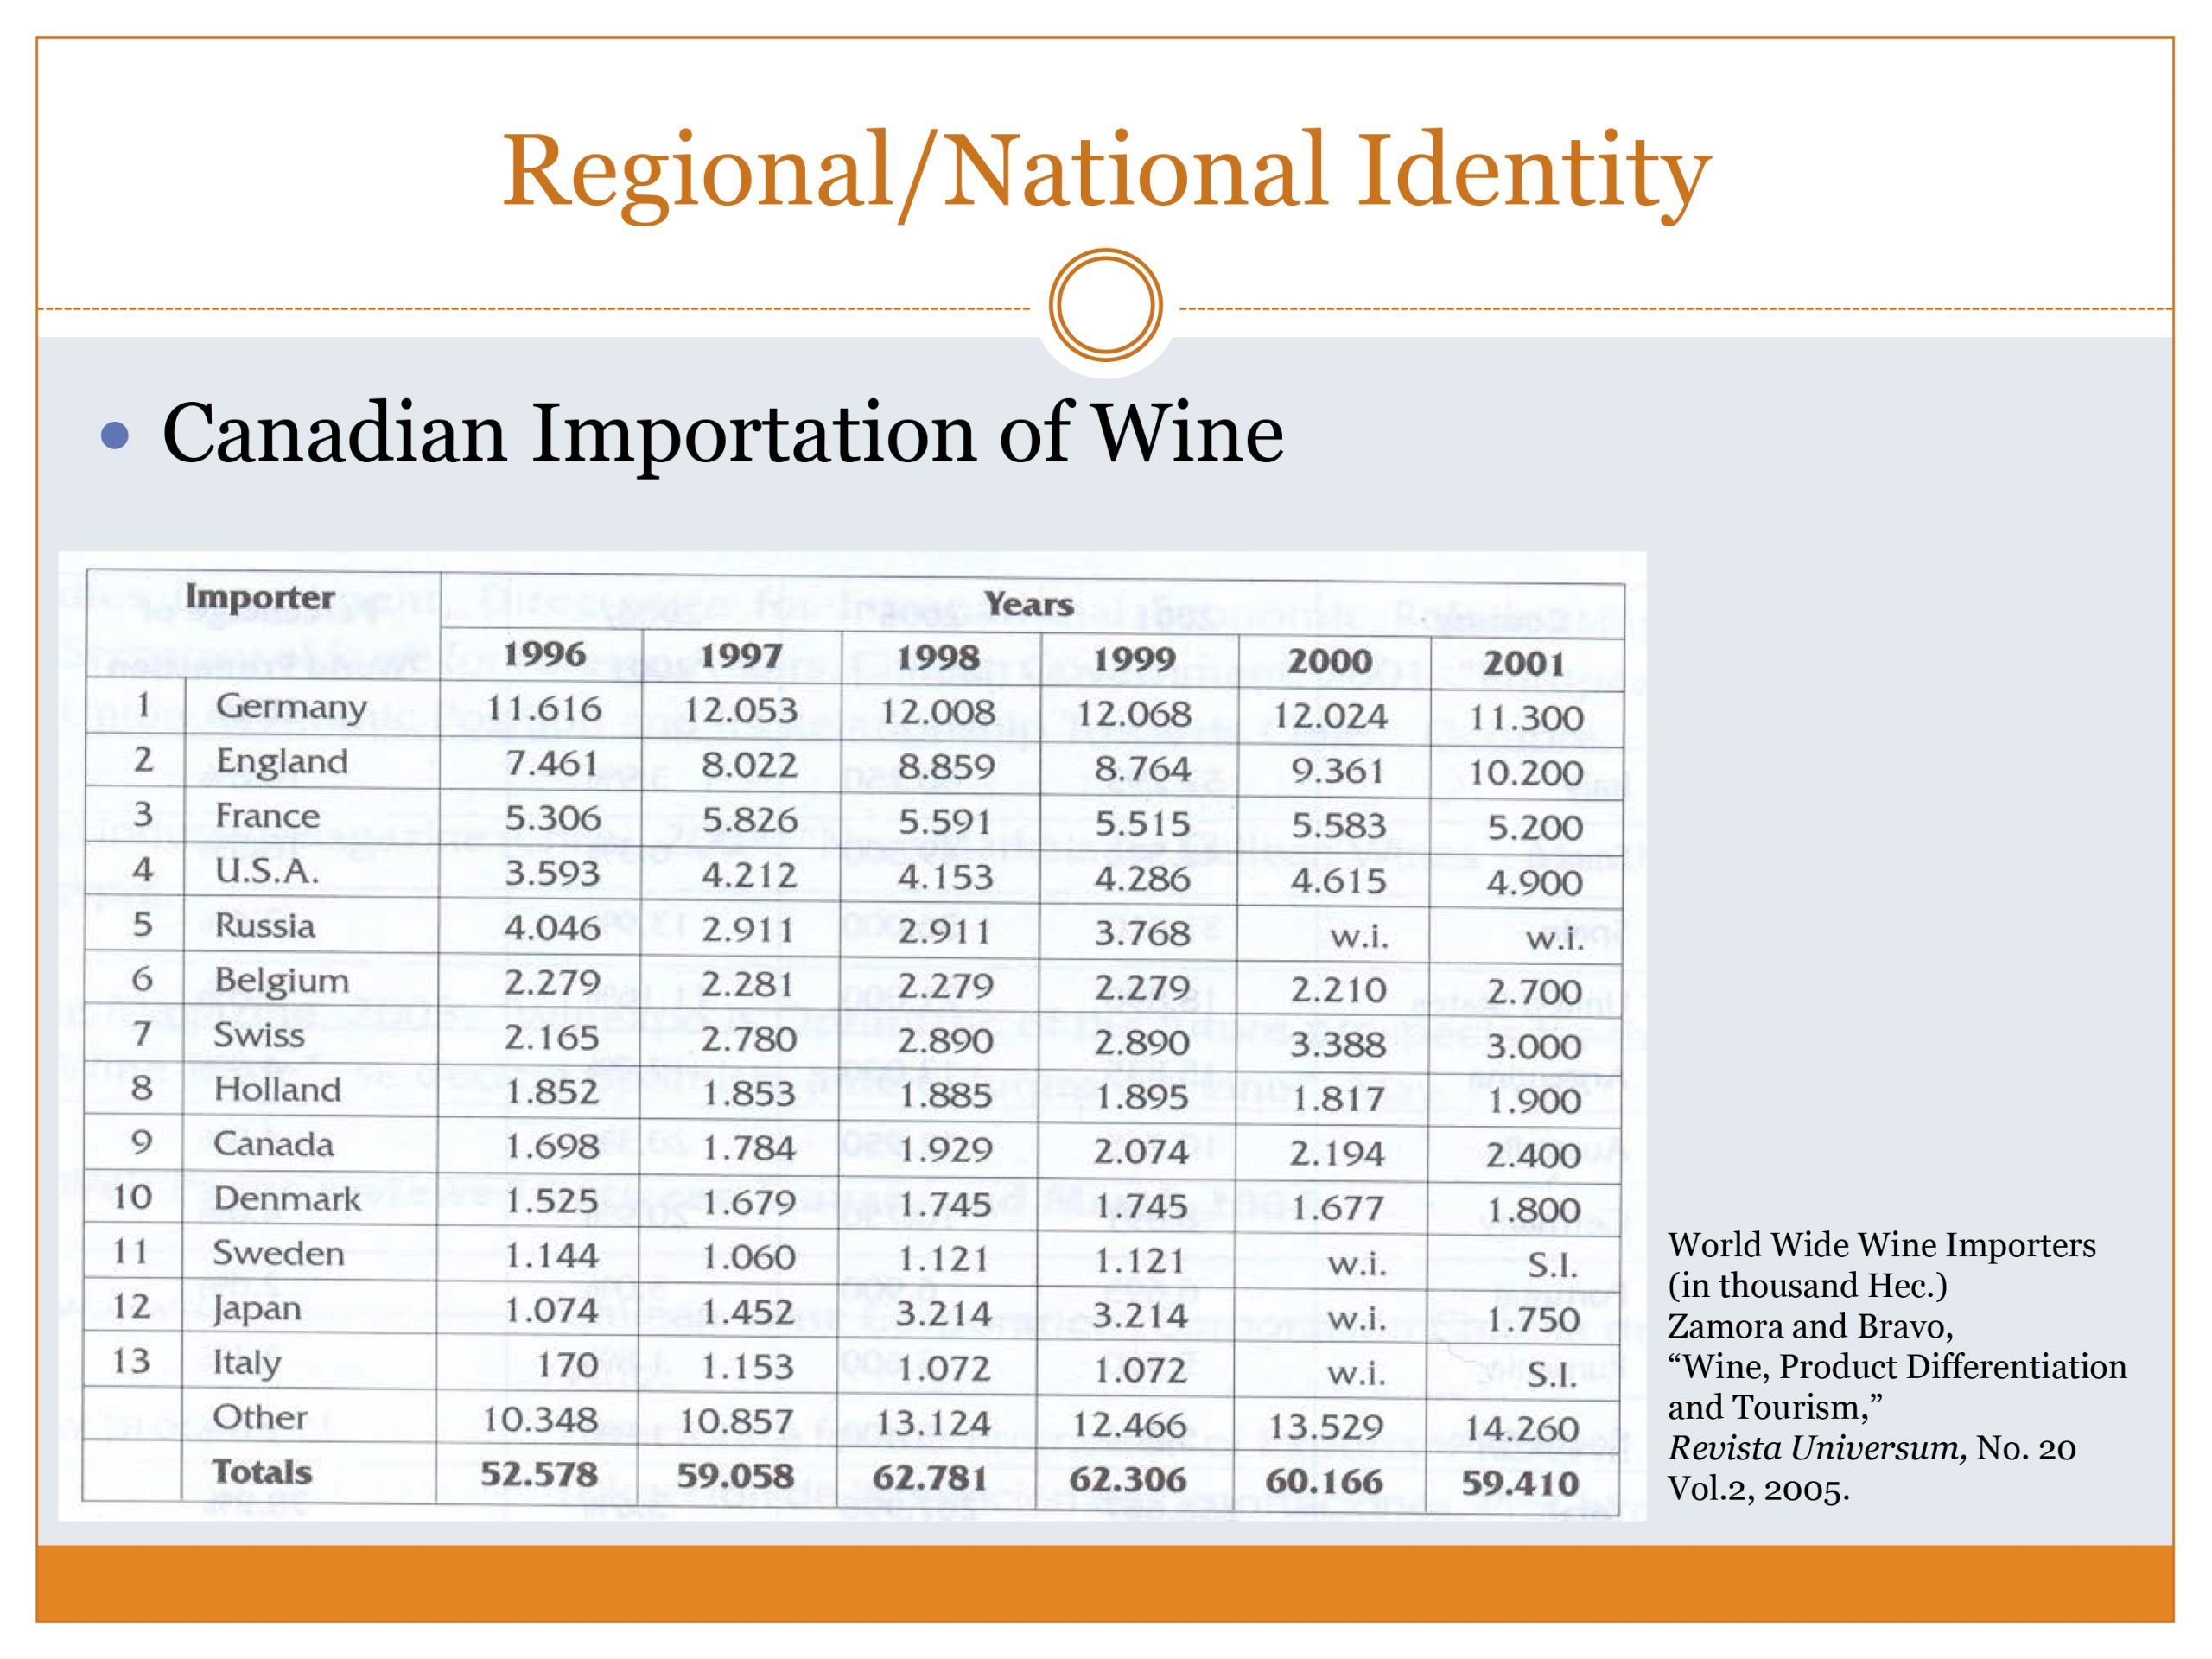 Powerpoint slide showing a chart of the number of Canadian Wine Imports from countries around the world.